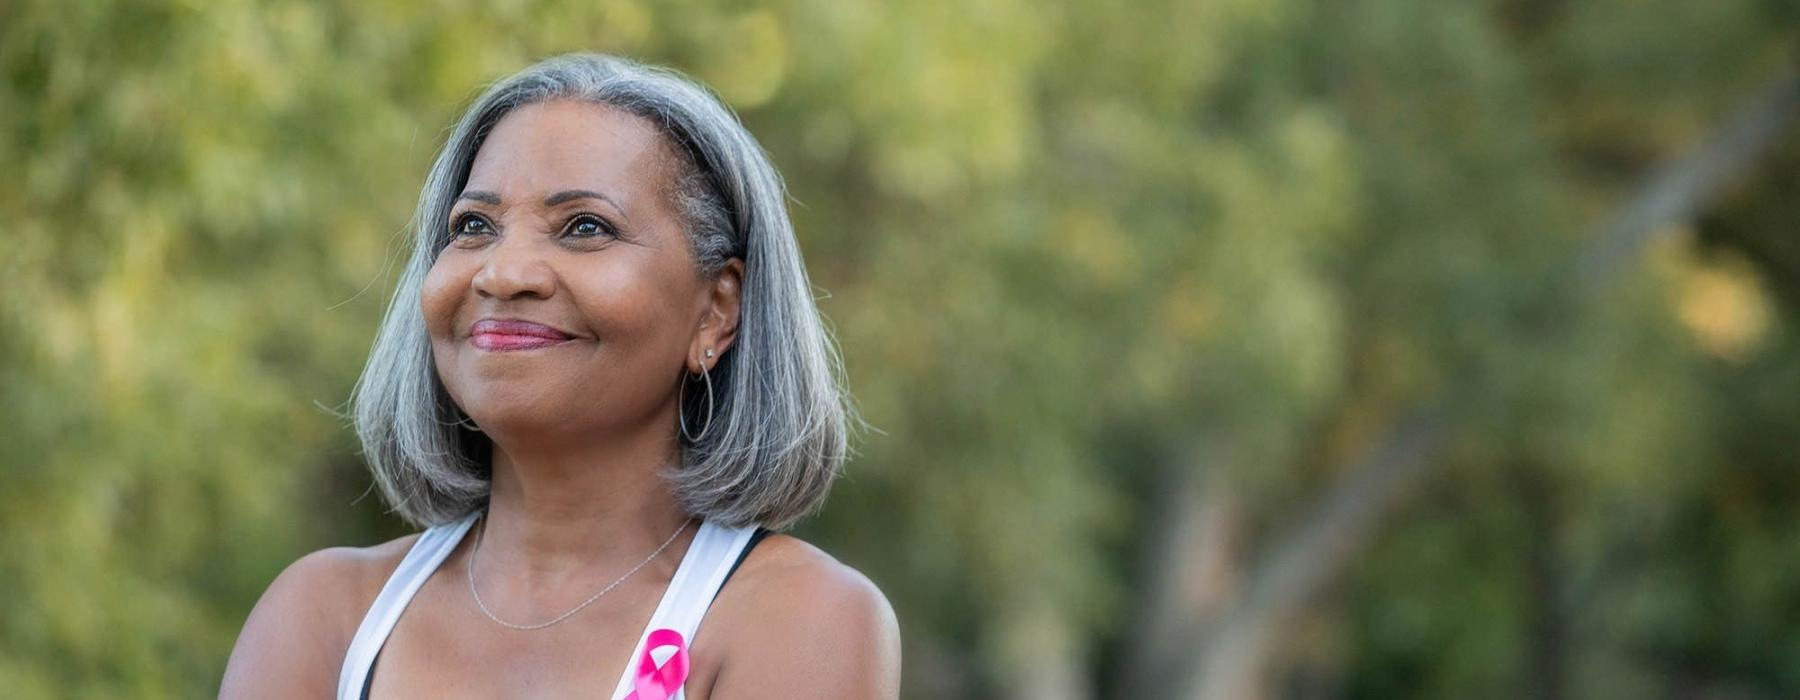 a woman with grey hair smiles to herself in neighborhood park